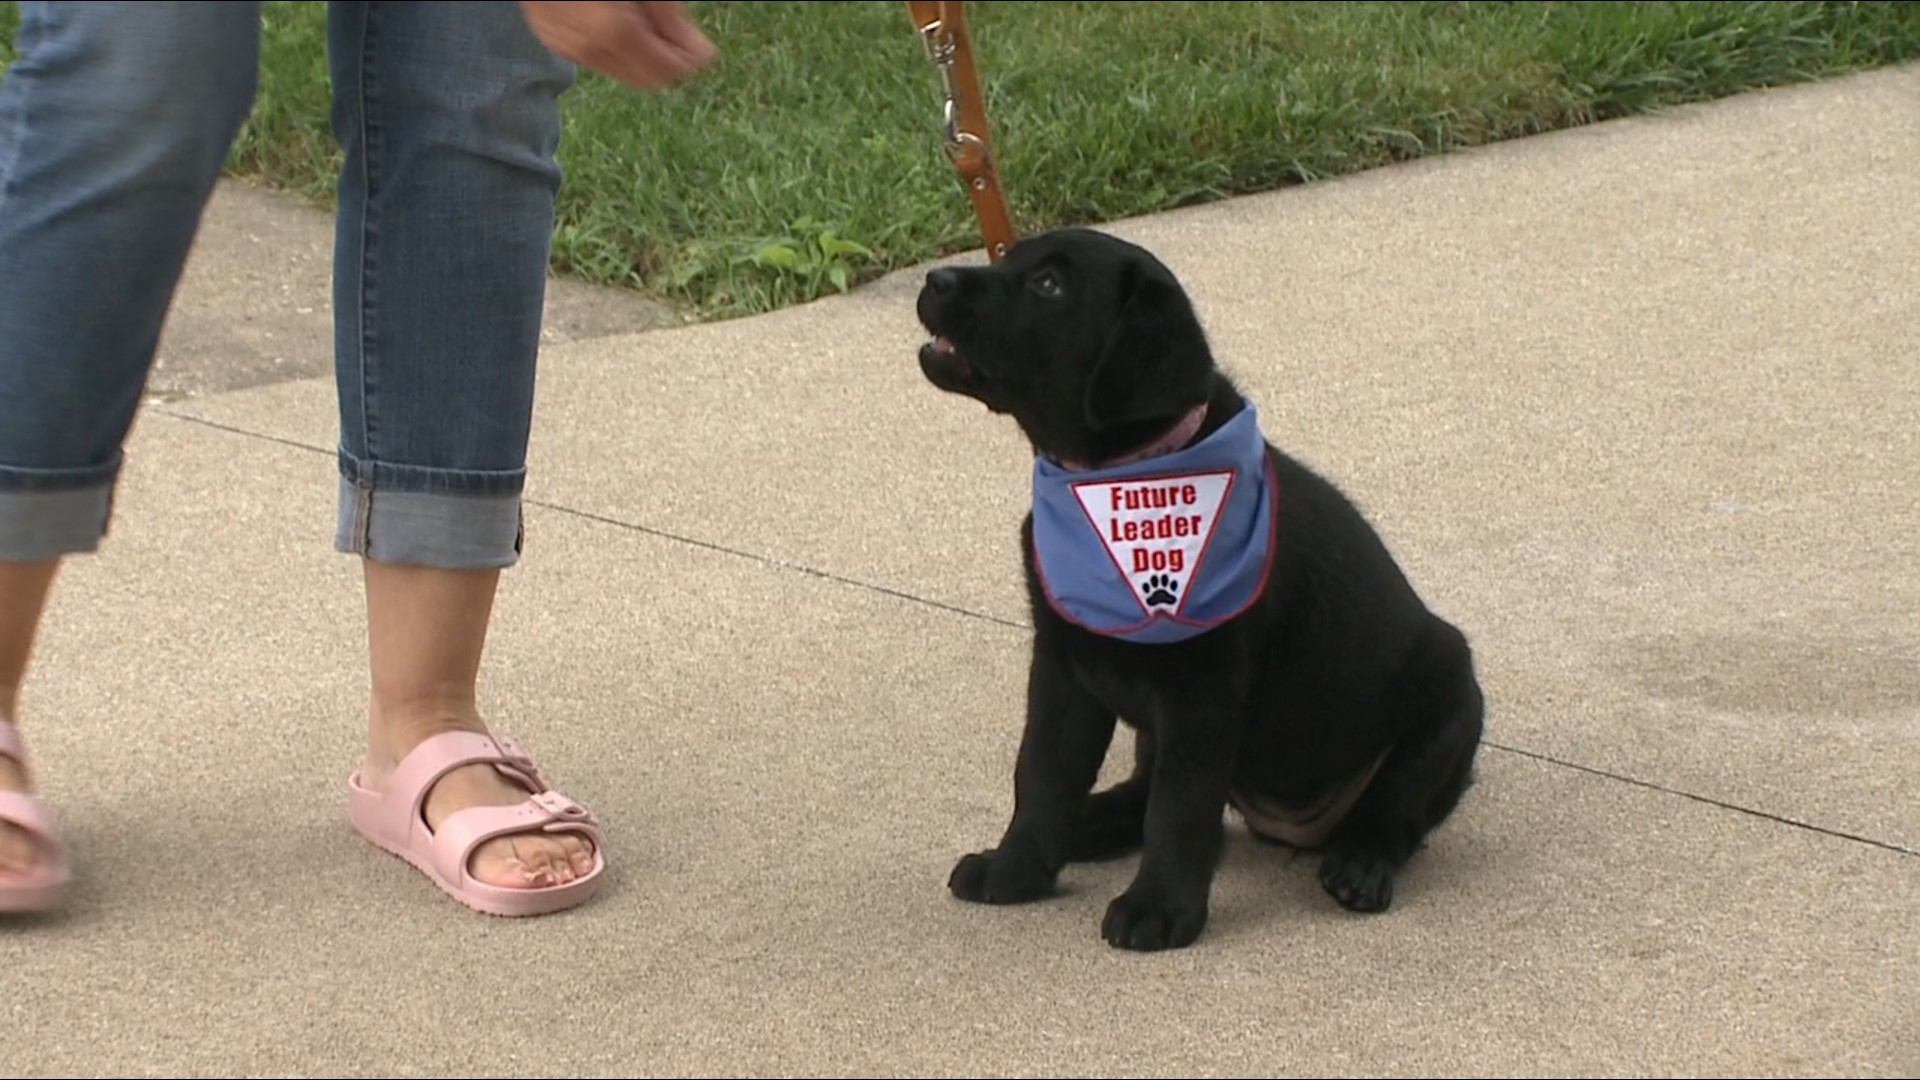 They've raised over 20 puppies for over 20 years that go on to help the blind. Now their newest one will eventually assist a veteran or first responder.